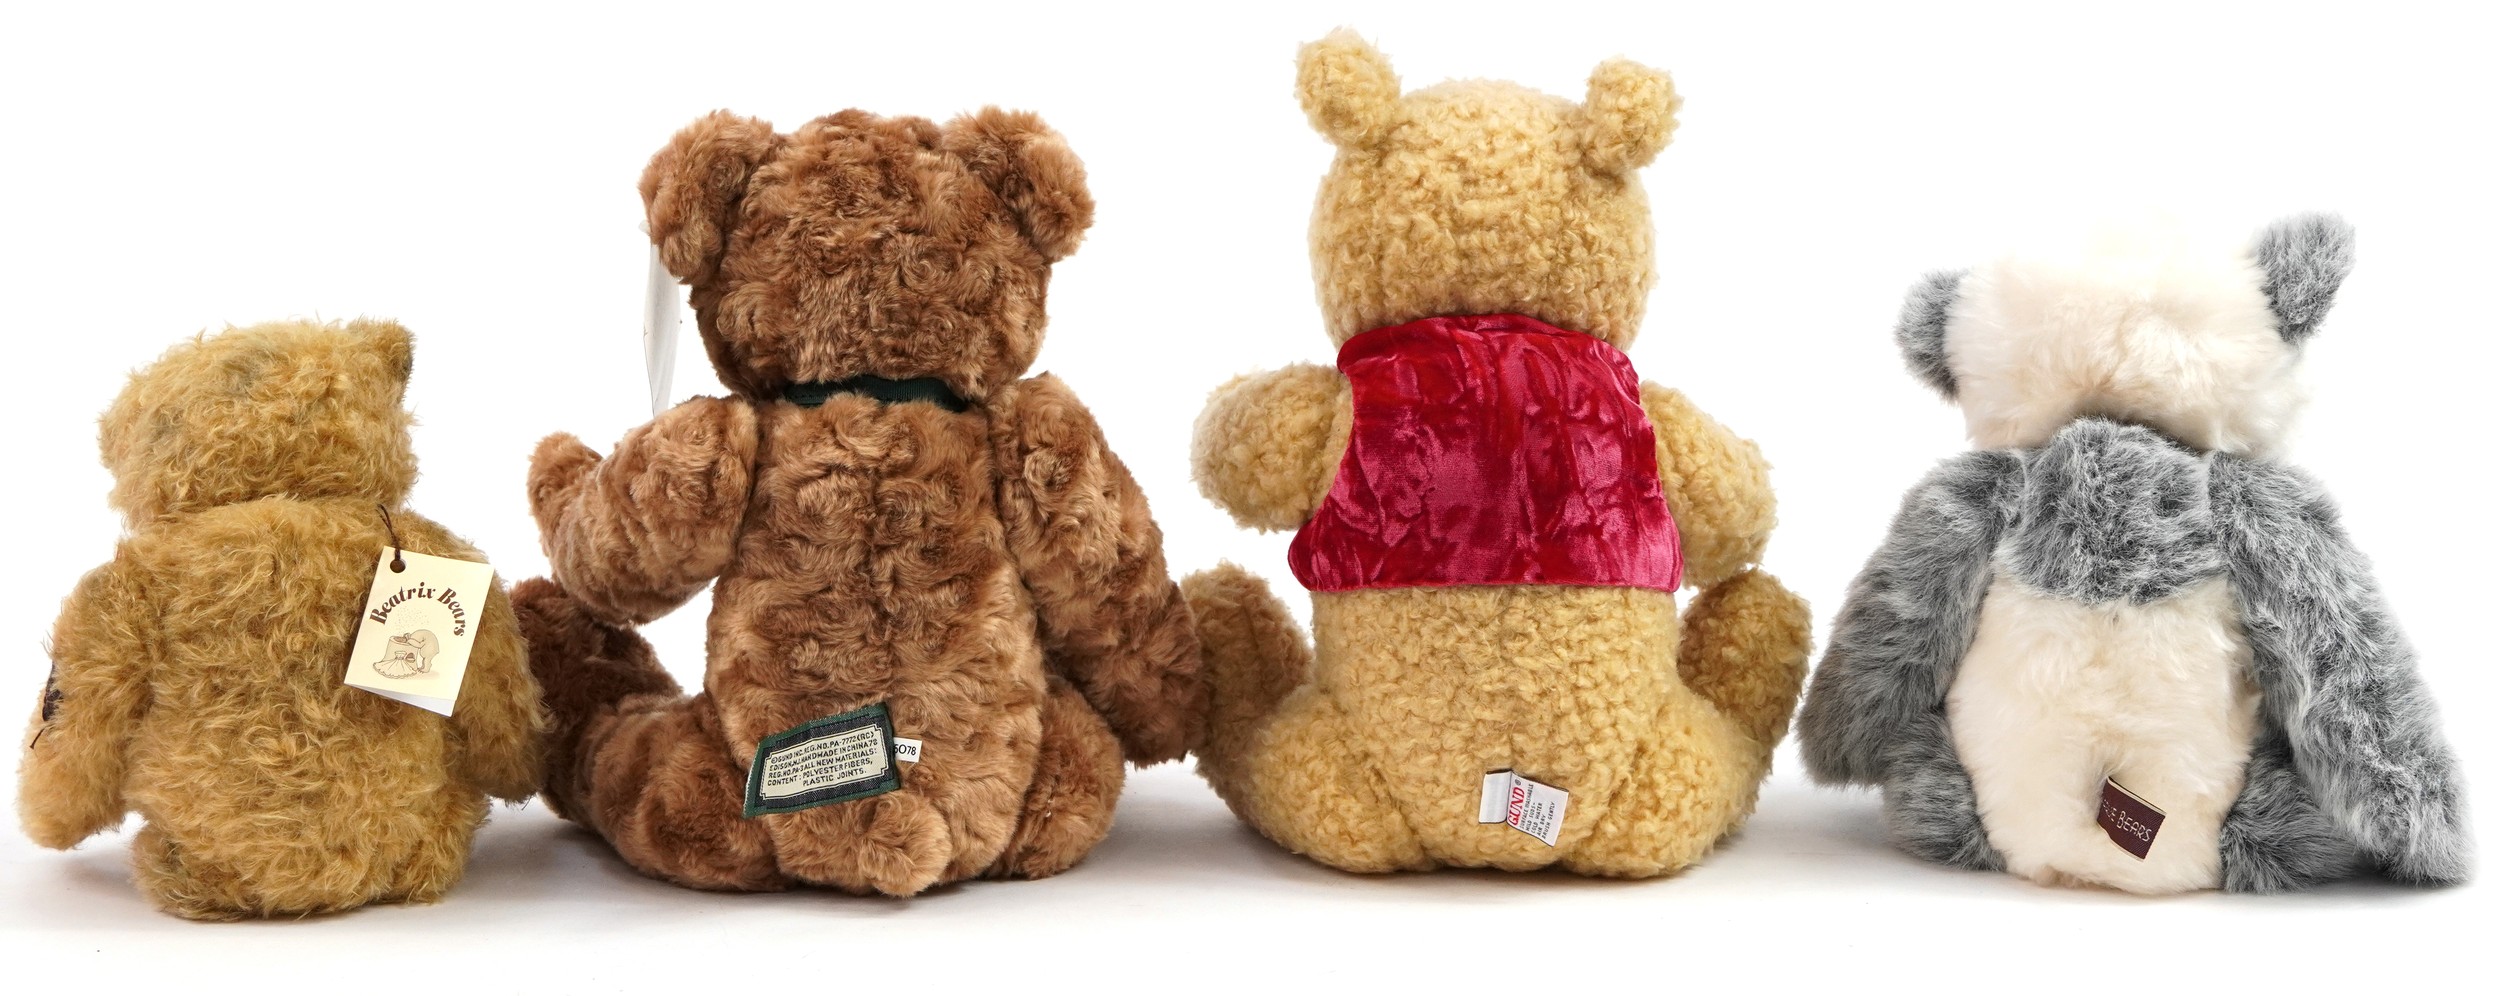 Four collectable teddy bears including Charlie bears, the largest 45cm high - Image 2 of 4